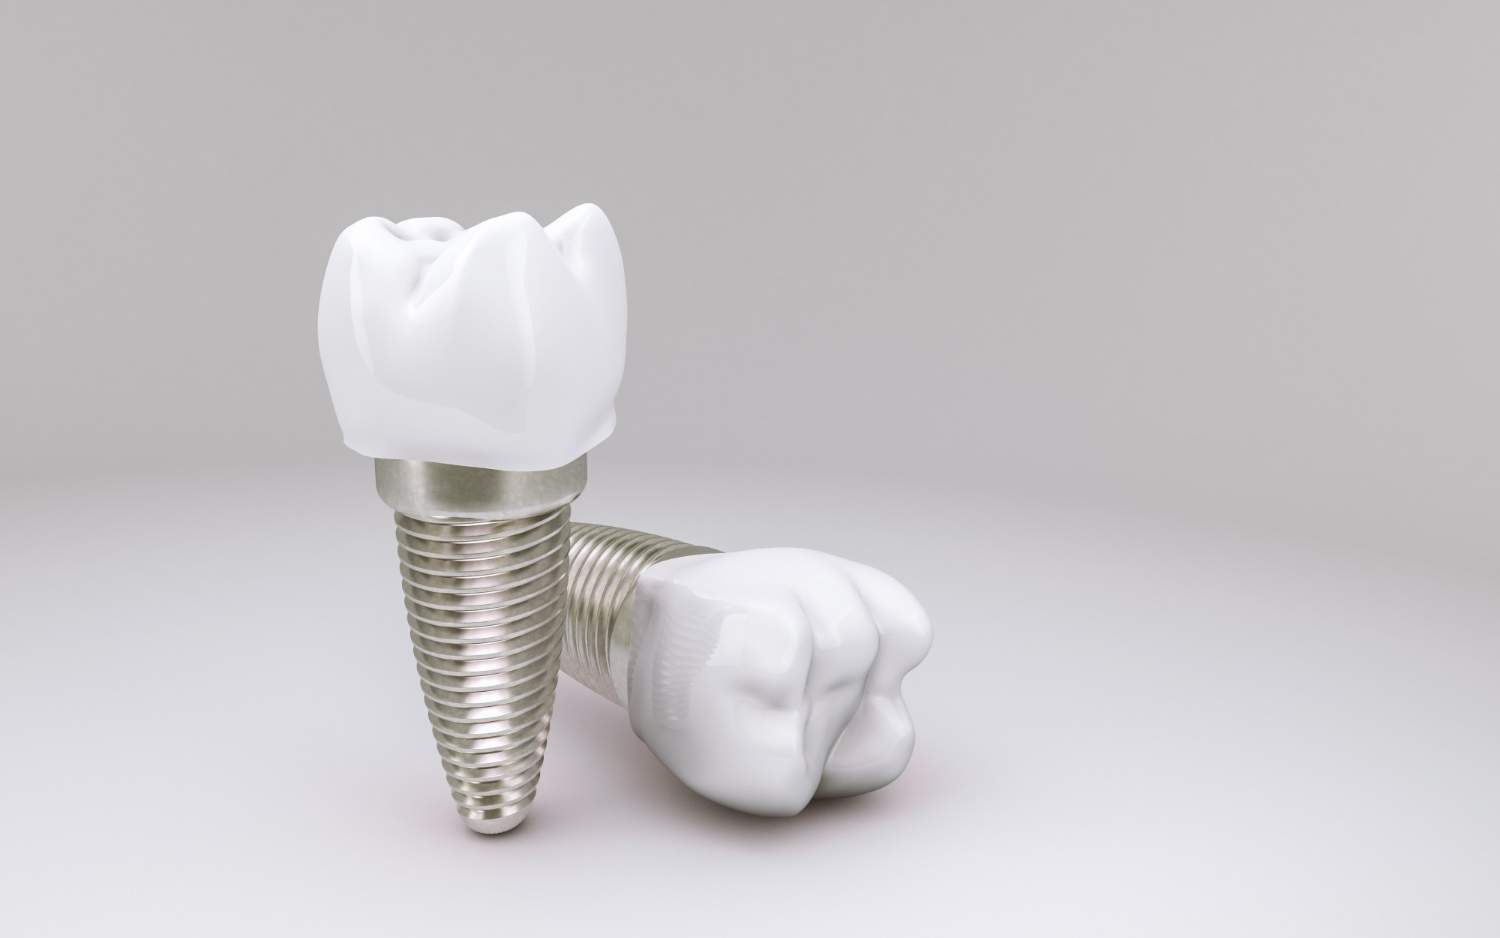 tooth-implant-concept-on-white